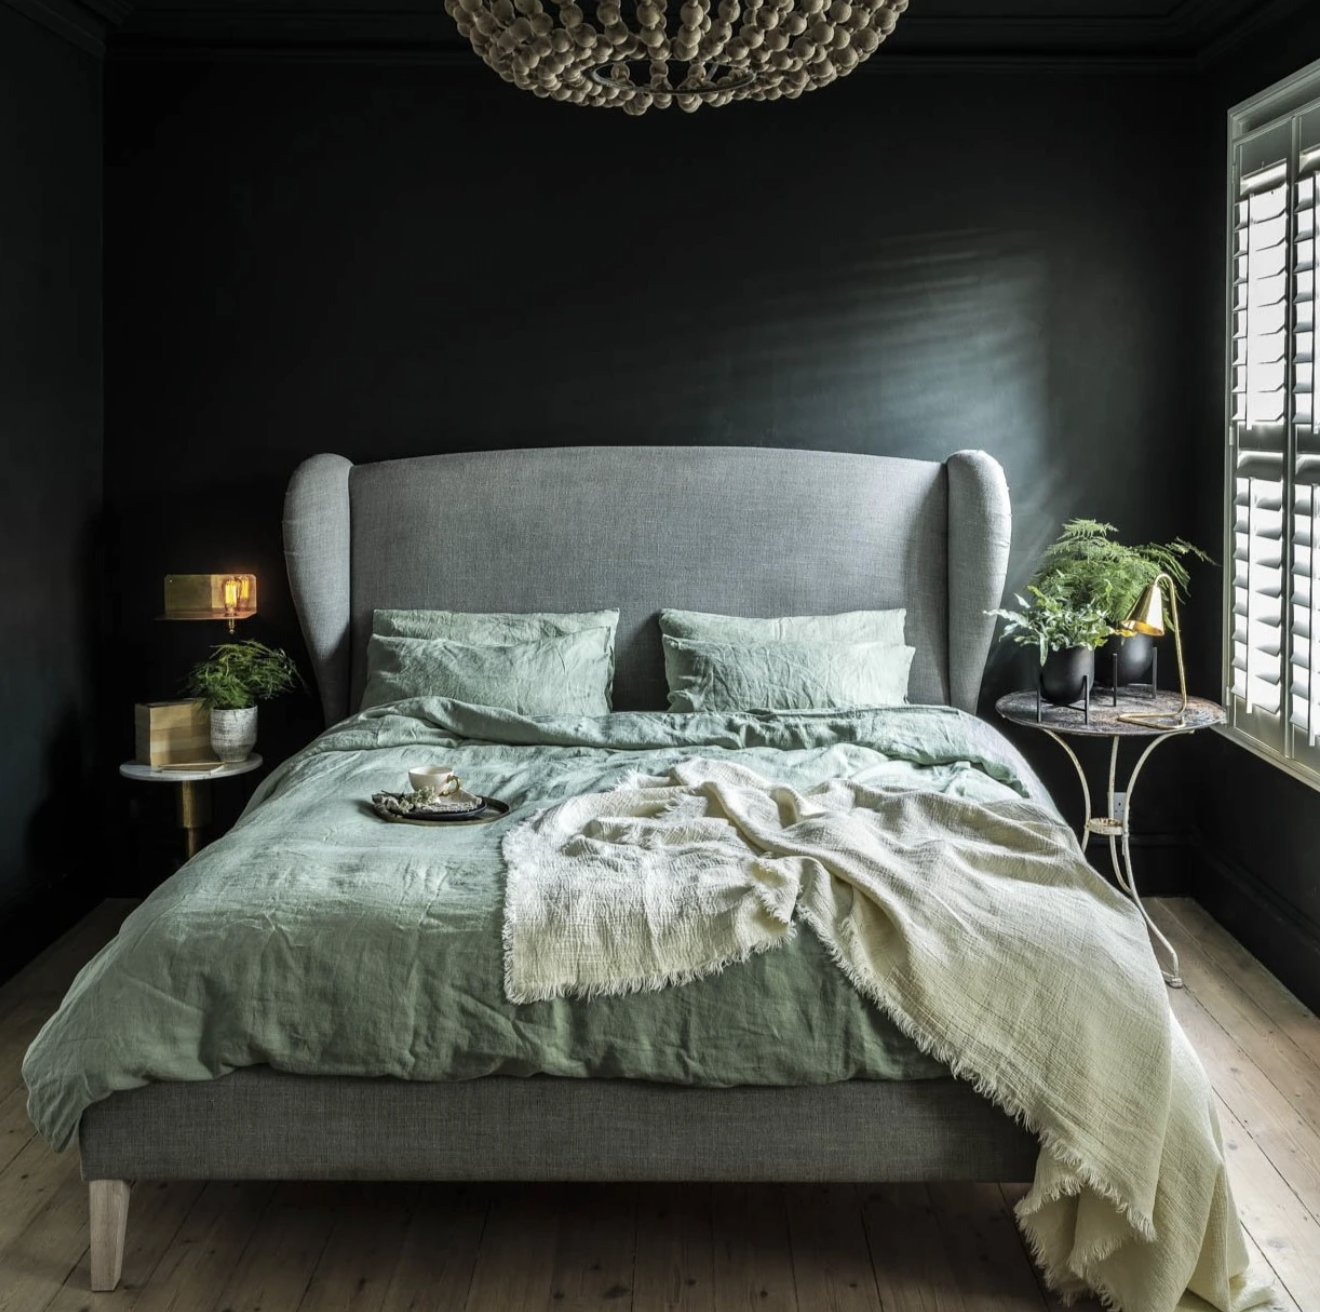 the linen bedding in teal grean